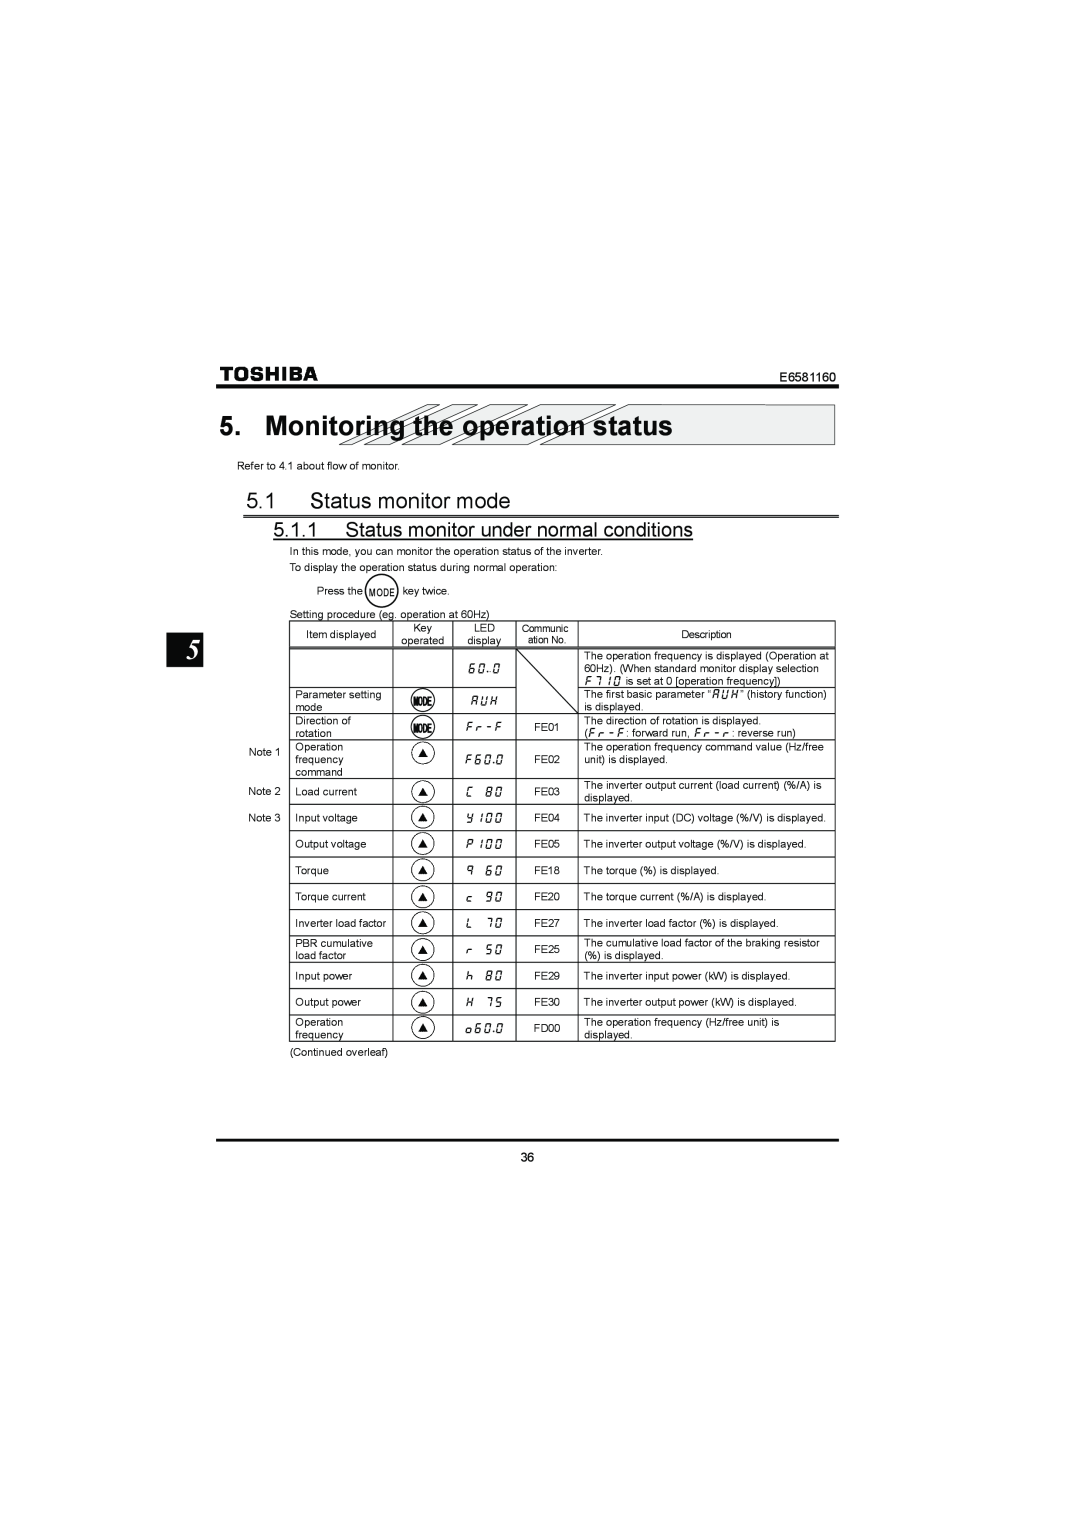 Toshiba VF-S11 manual Monitoring the operation status, 5.1Status monitor mode, 5.1.1Status monitor under normal conditions 